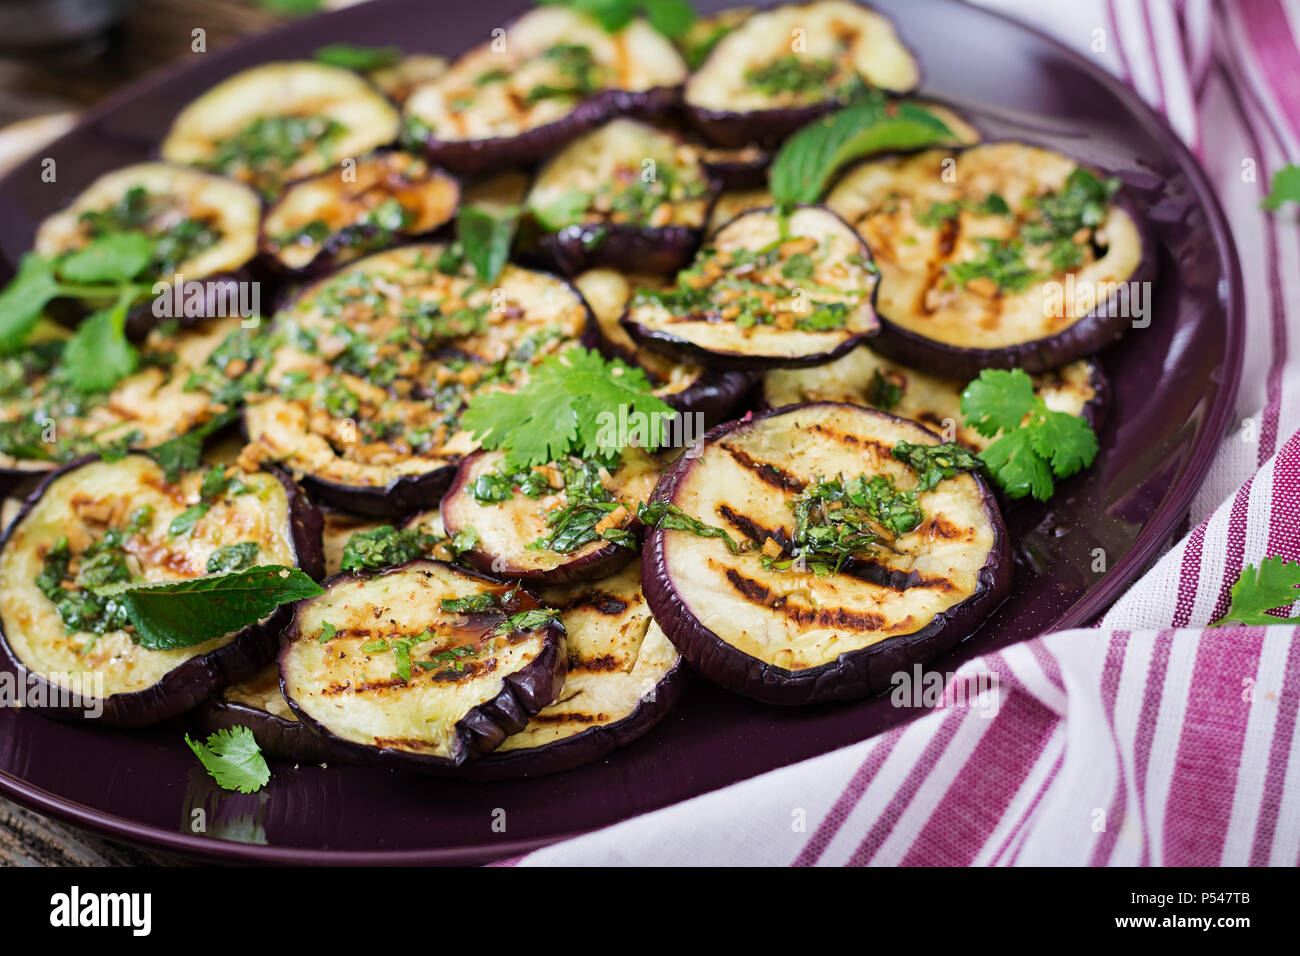 Eggplant grilled with balsamic sauce, garlic, cilantro and mint. Vegan food. Grilled aubergine. Stock Photo